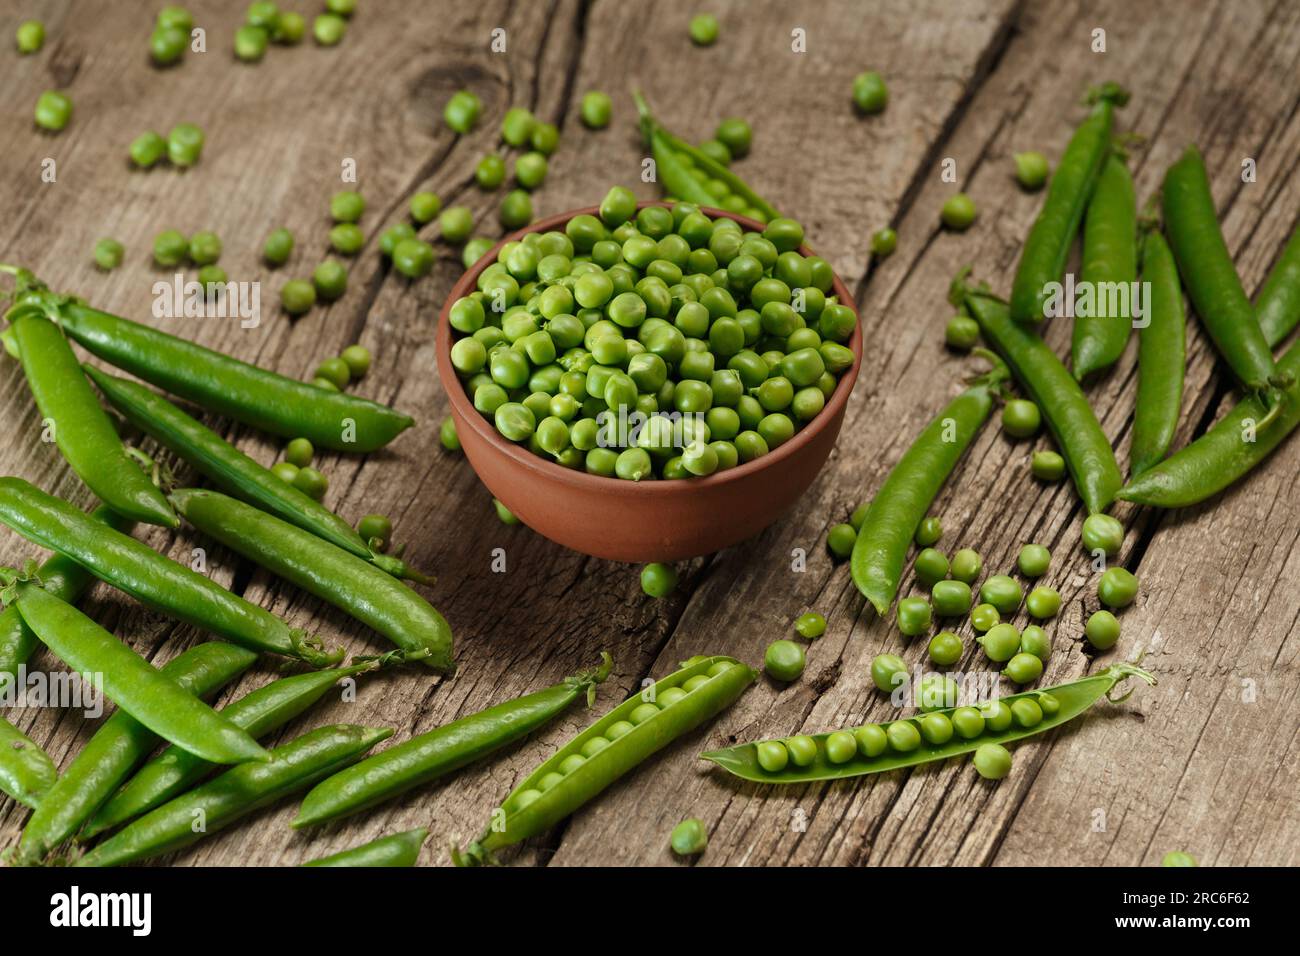 Fresh organic green peas in closed and open pods, scattered pea seeds, shelled green peas in a clay bowl on an aged wooden background Stock Photo